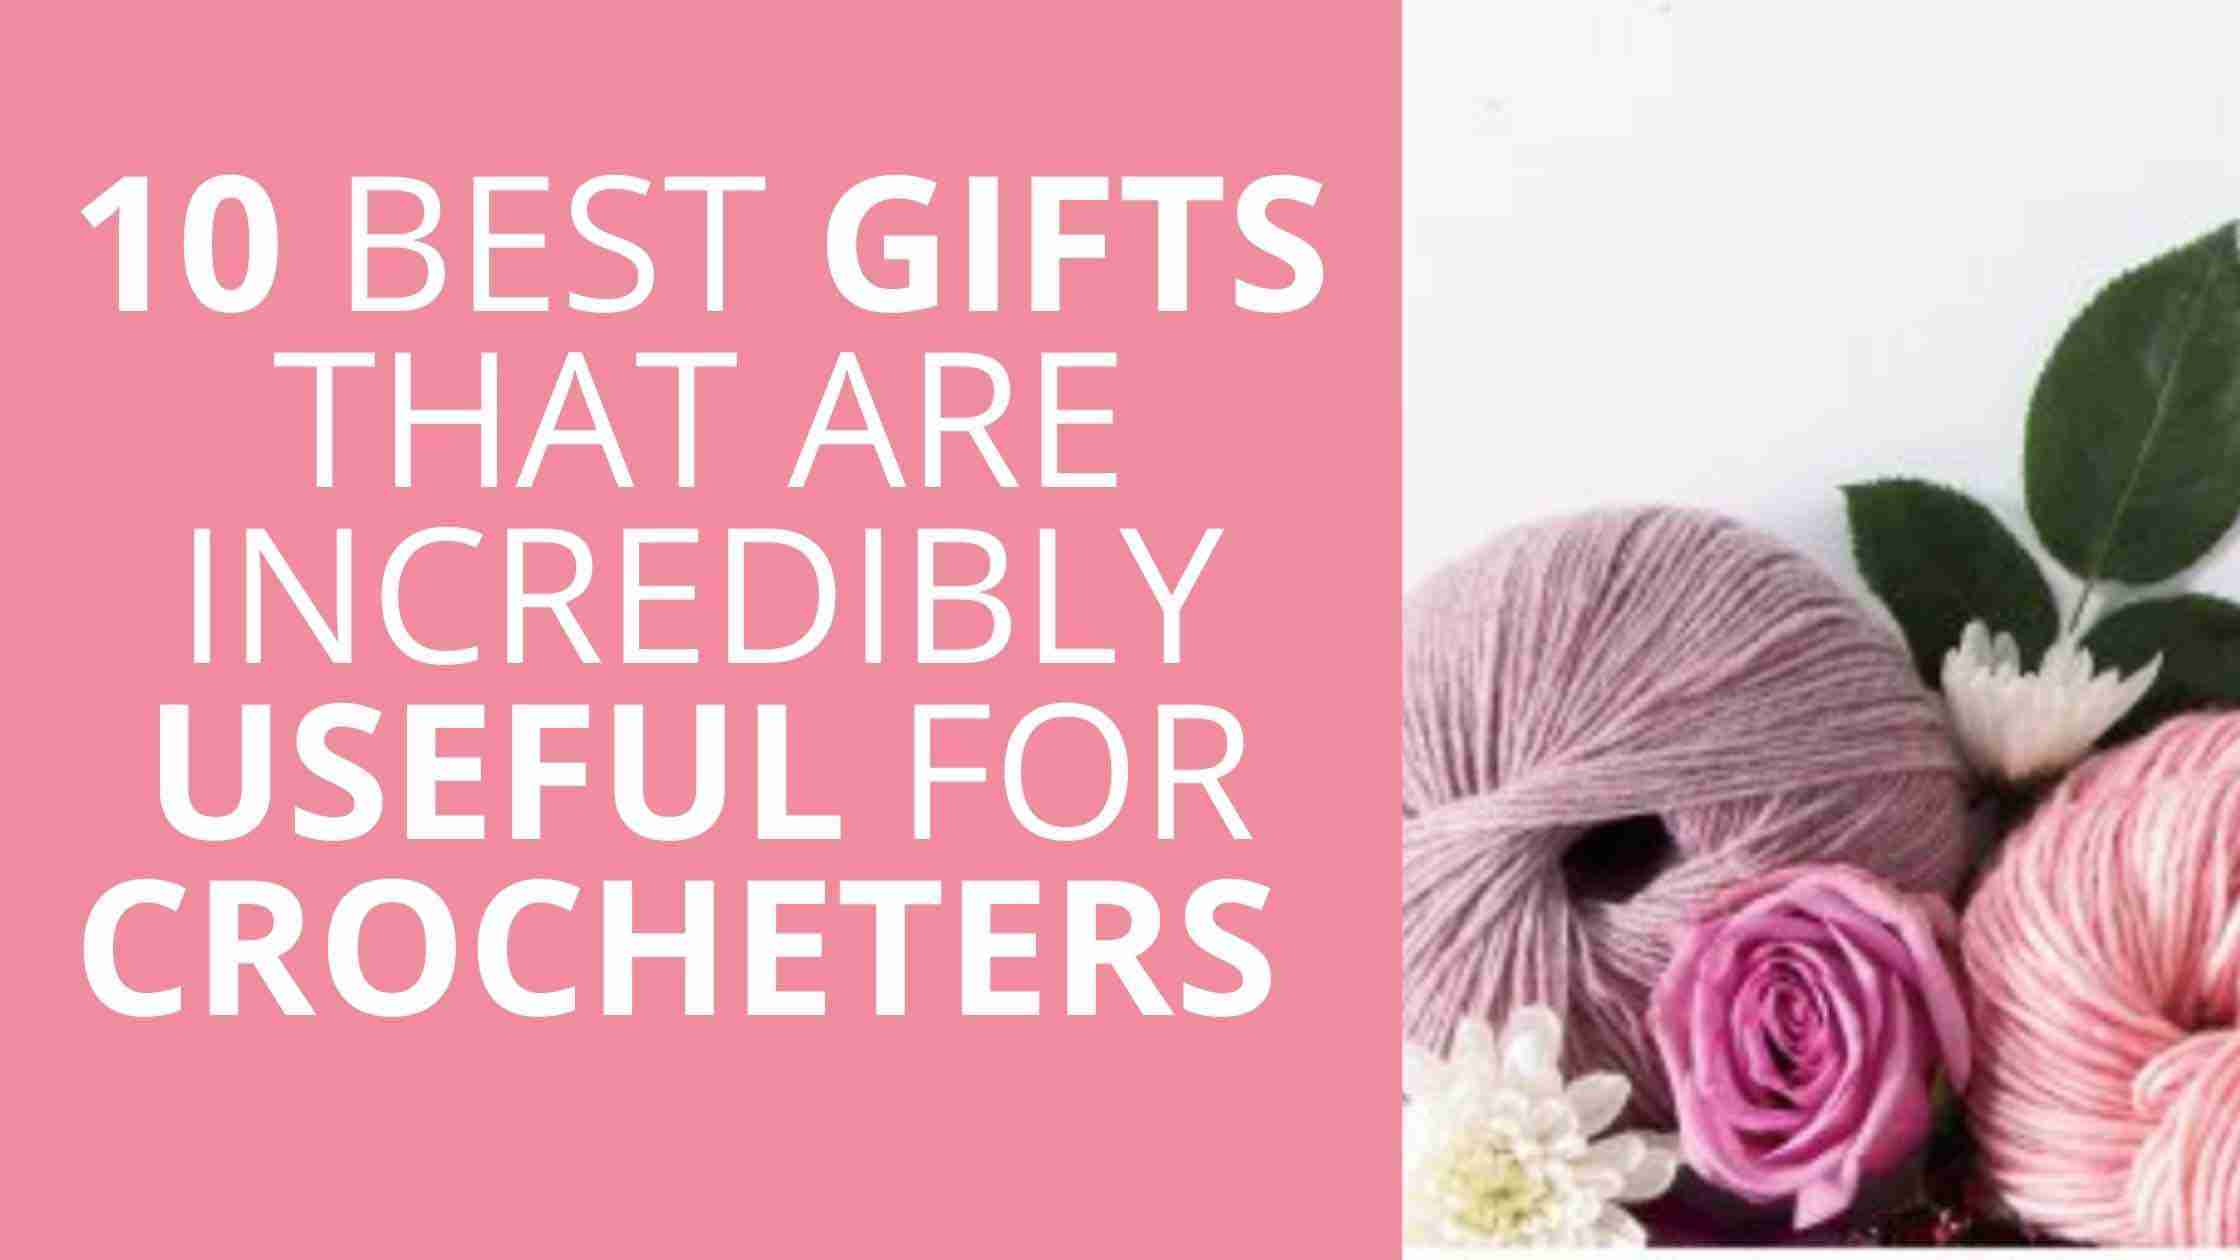 10 Best Gifts That Are Incredibly Useful For Crocheters - Start Crochet